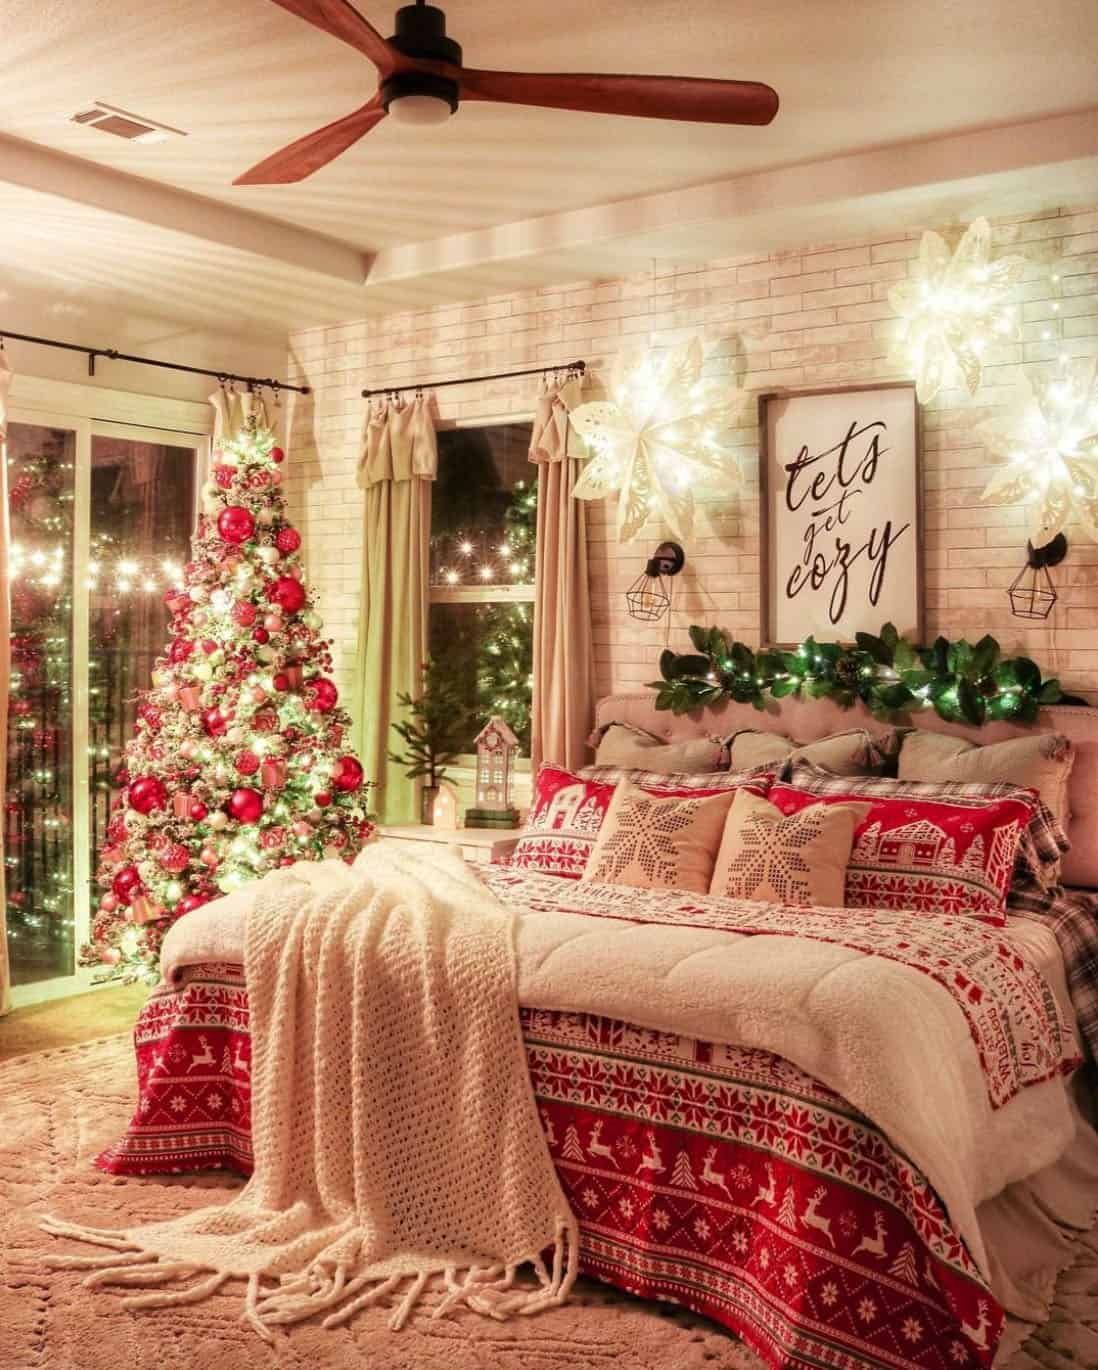 Merry Christmas From Our Home To Yours: 70 Christmas Decor Ideas. Christmas decorations bedroom, Christmas decorations living room, Christmas decor inspiration